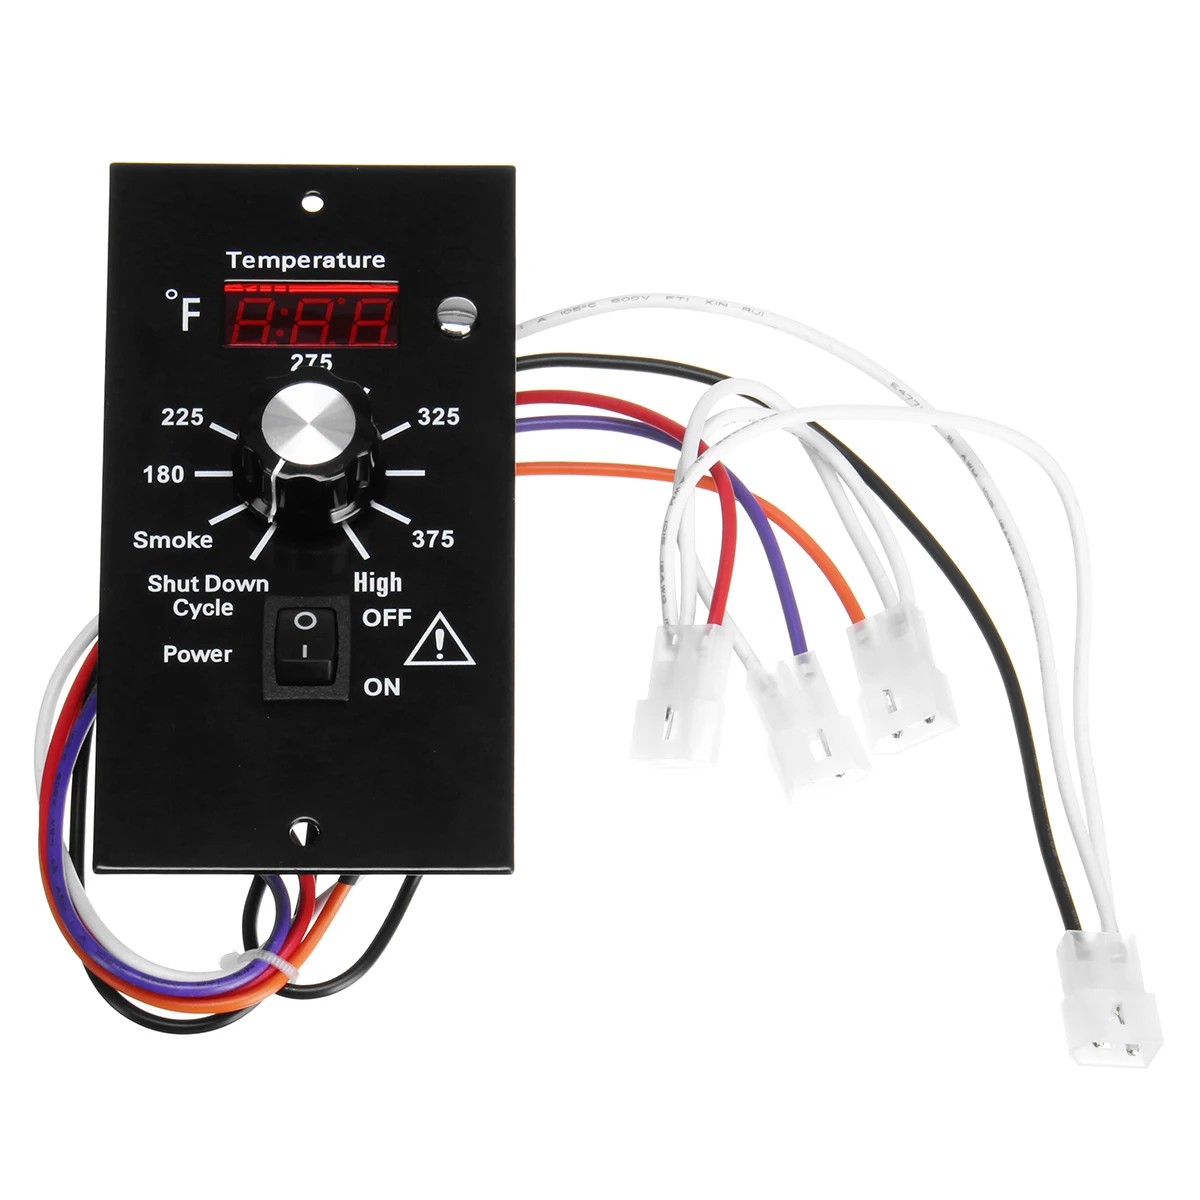 Digital Thermostat Control Panel Kit Replacement Parts for Traeger Pellet Wood Pellet Grills